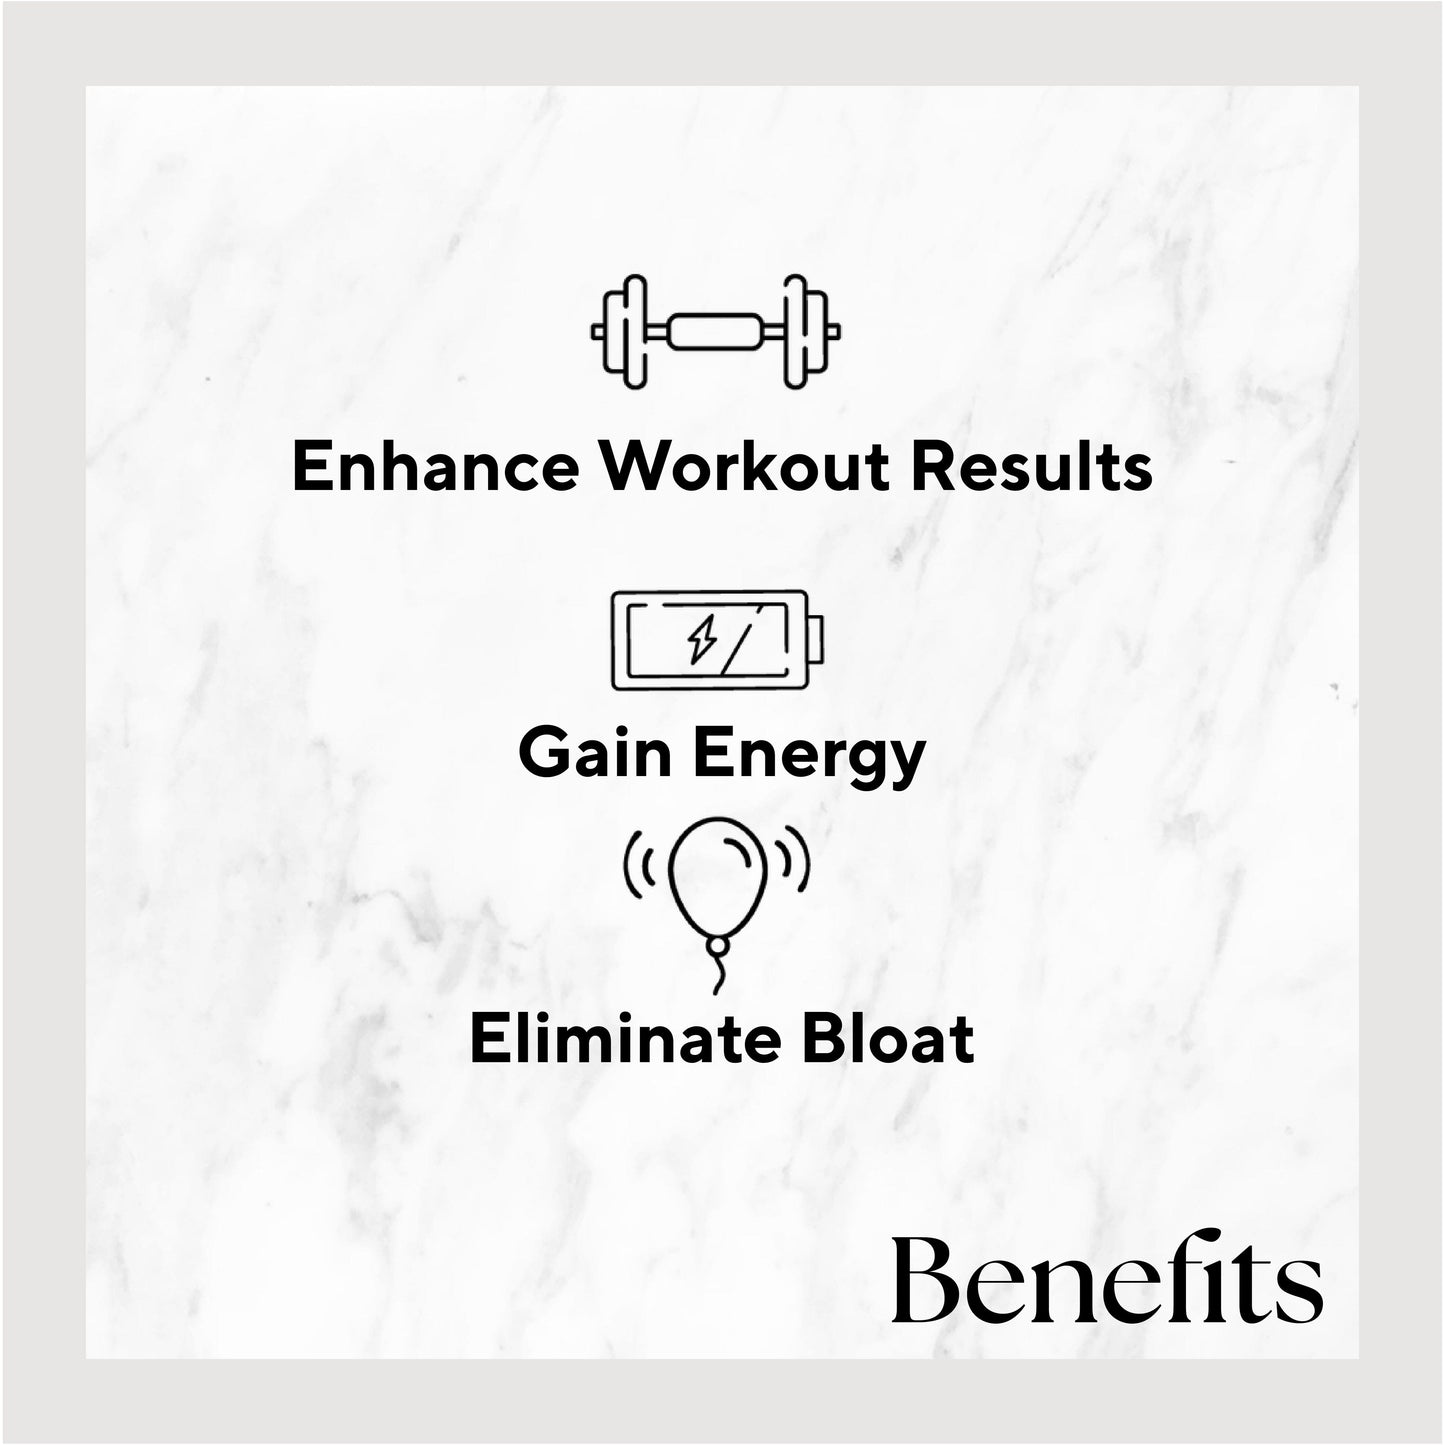 Infographic listing benefits of the product. Benefits include: Enhance Workout Results, Gain Energy, and Eliminate Bloat.